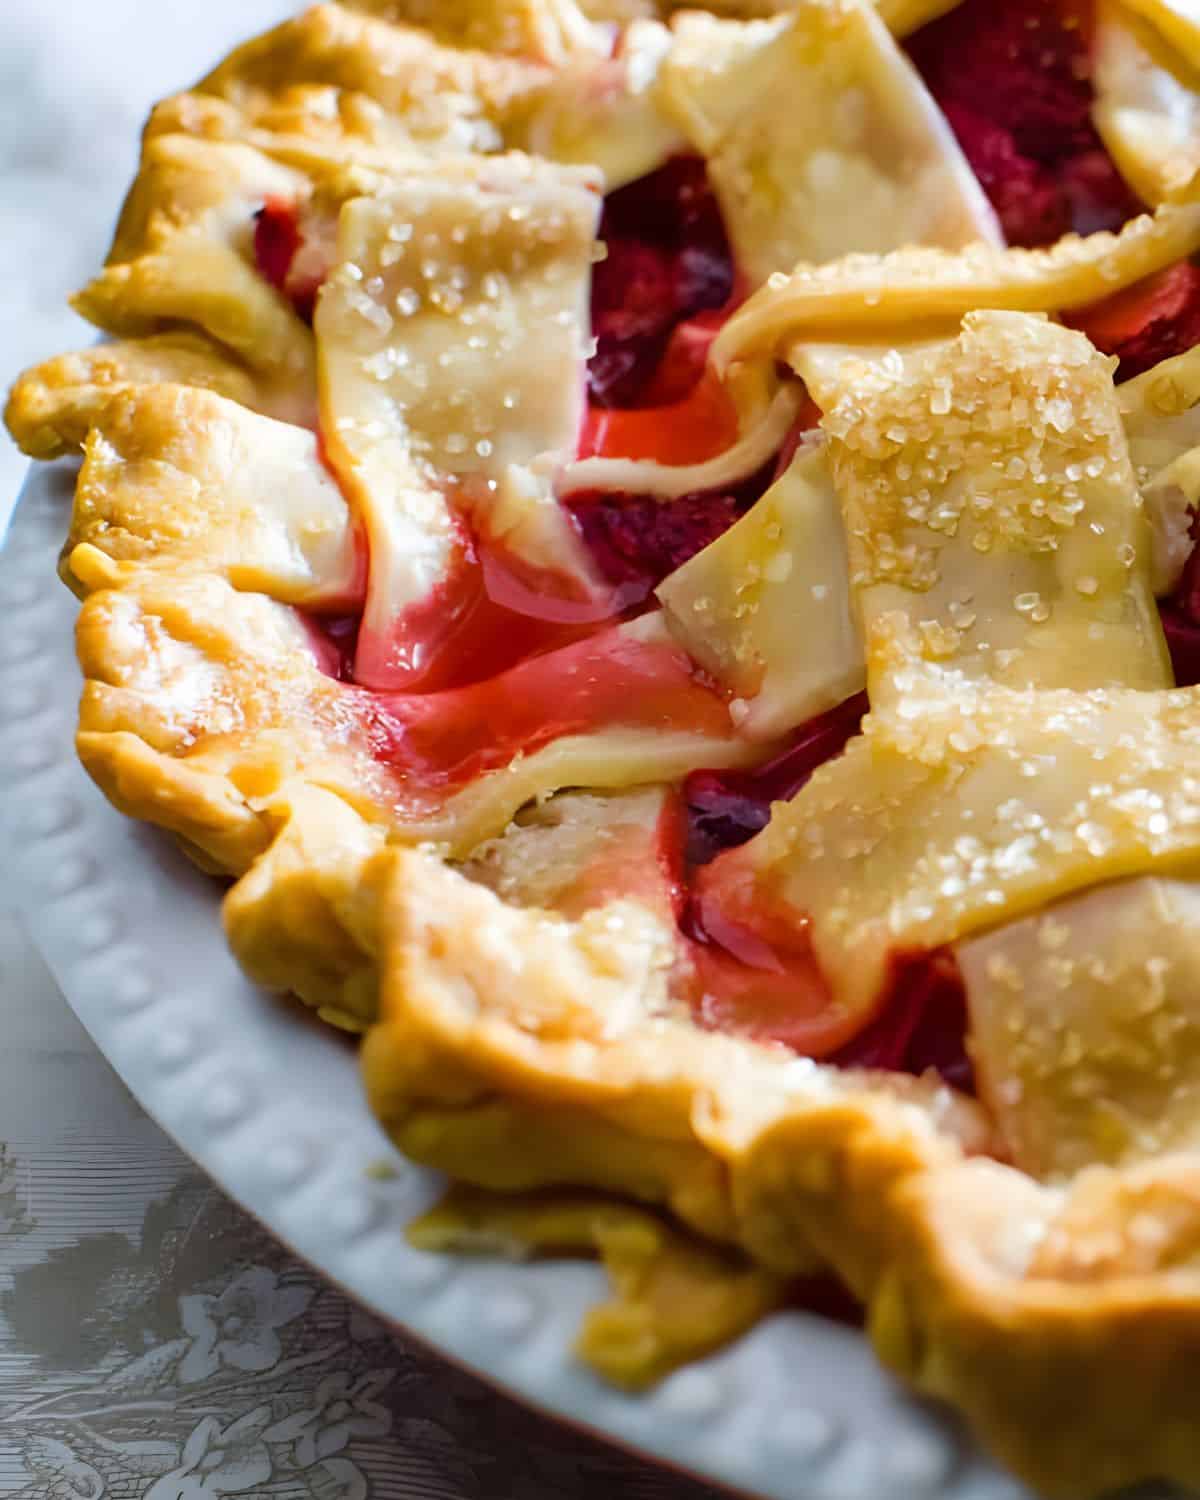 A closeup of the baked strawberry pie.